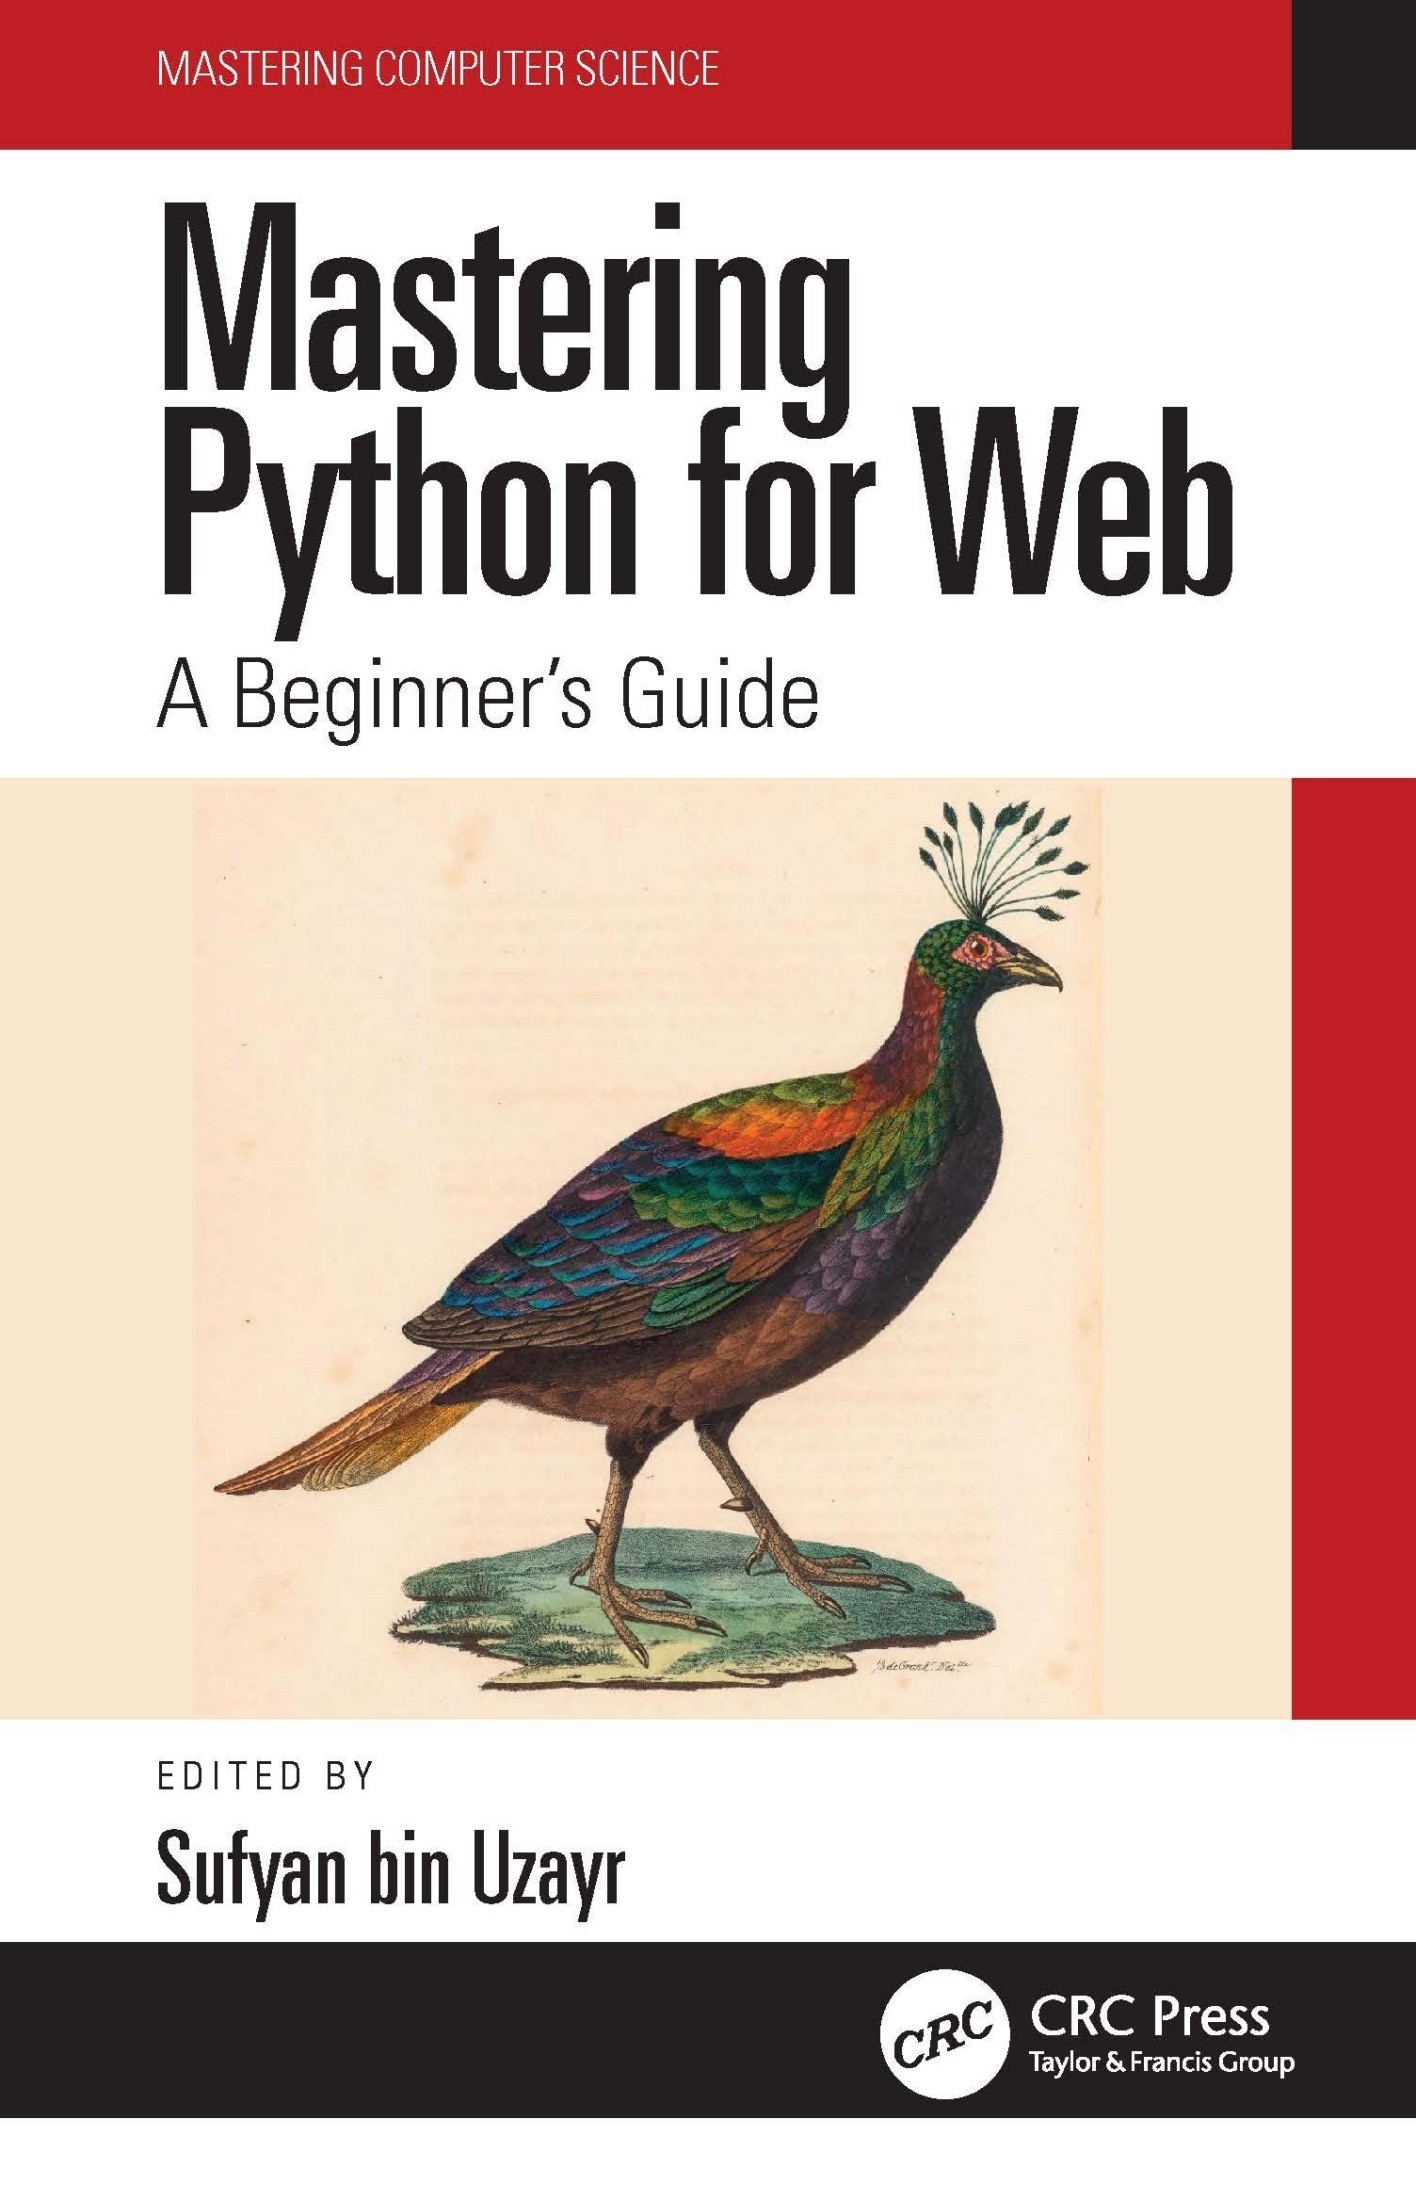 Mastering Python for Web: A Beginner's Guide